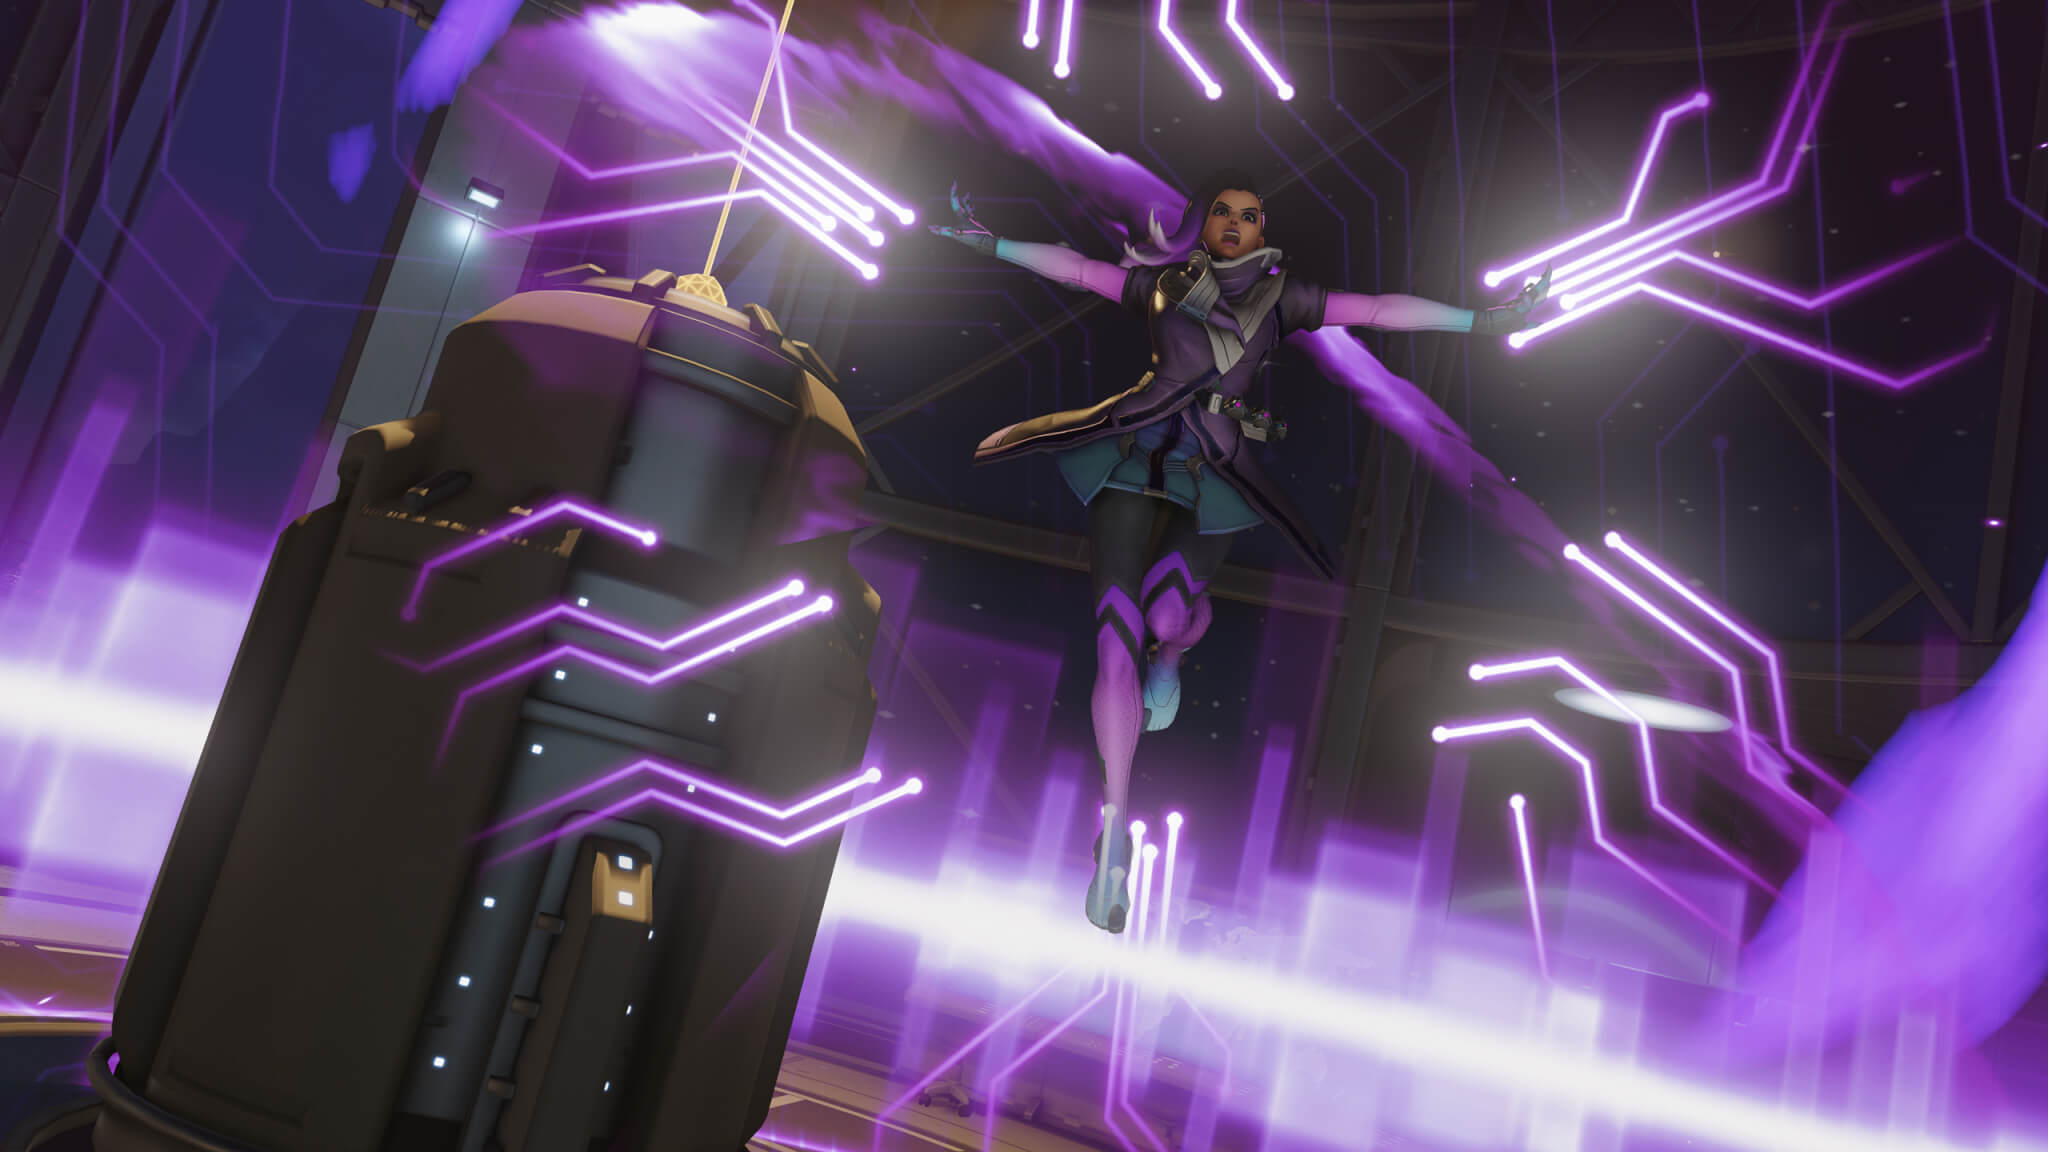 Sombra seems like a powerful and interesting new character.